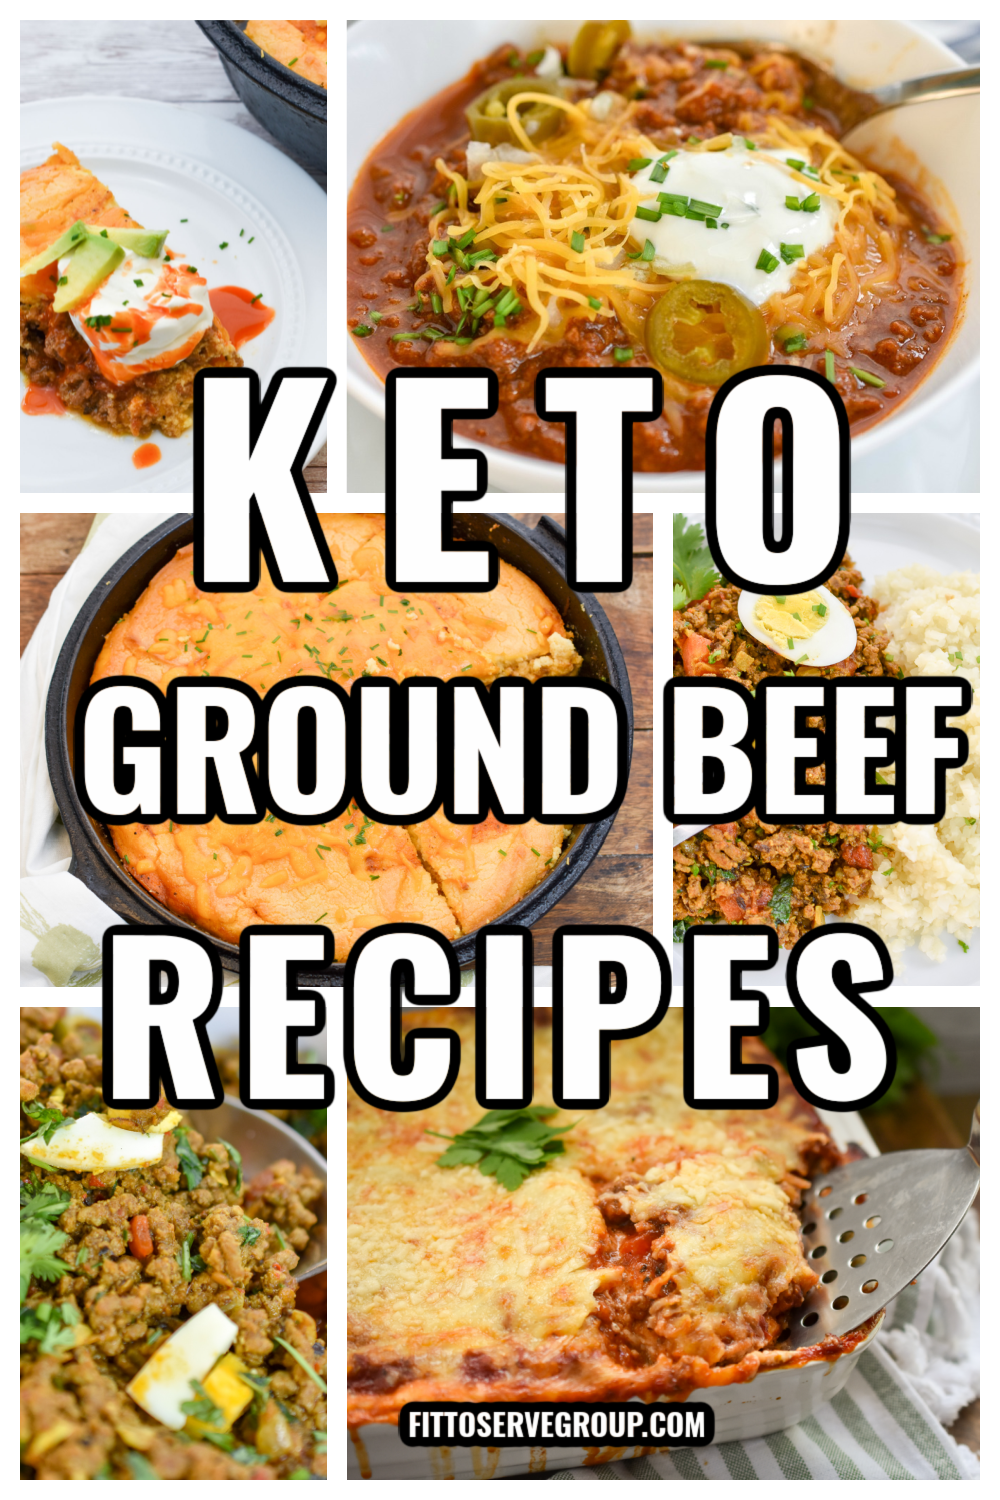 keto ground beef recipes. a collage of recipes that feature ground beef and are keto friendly